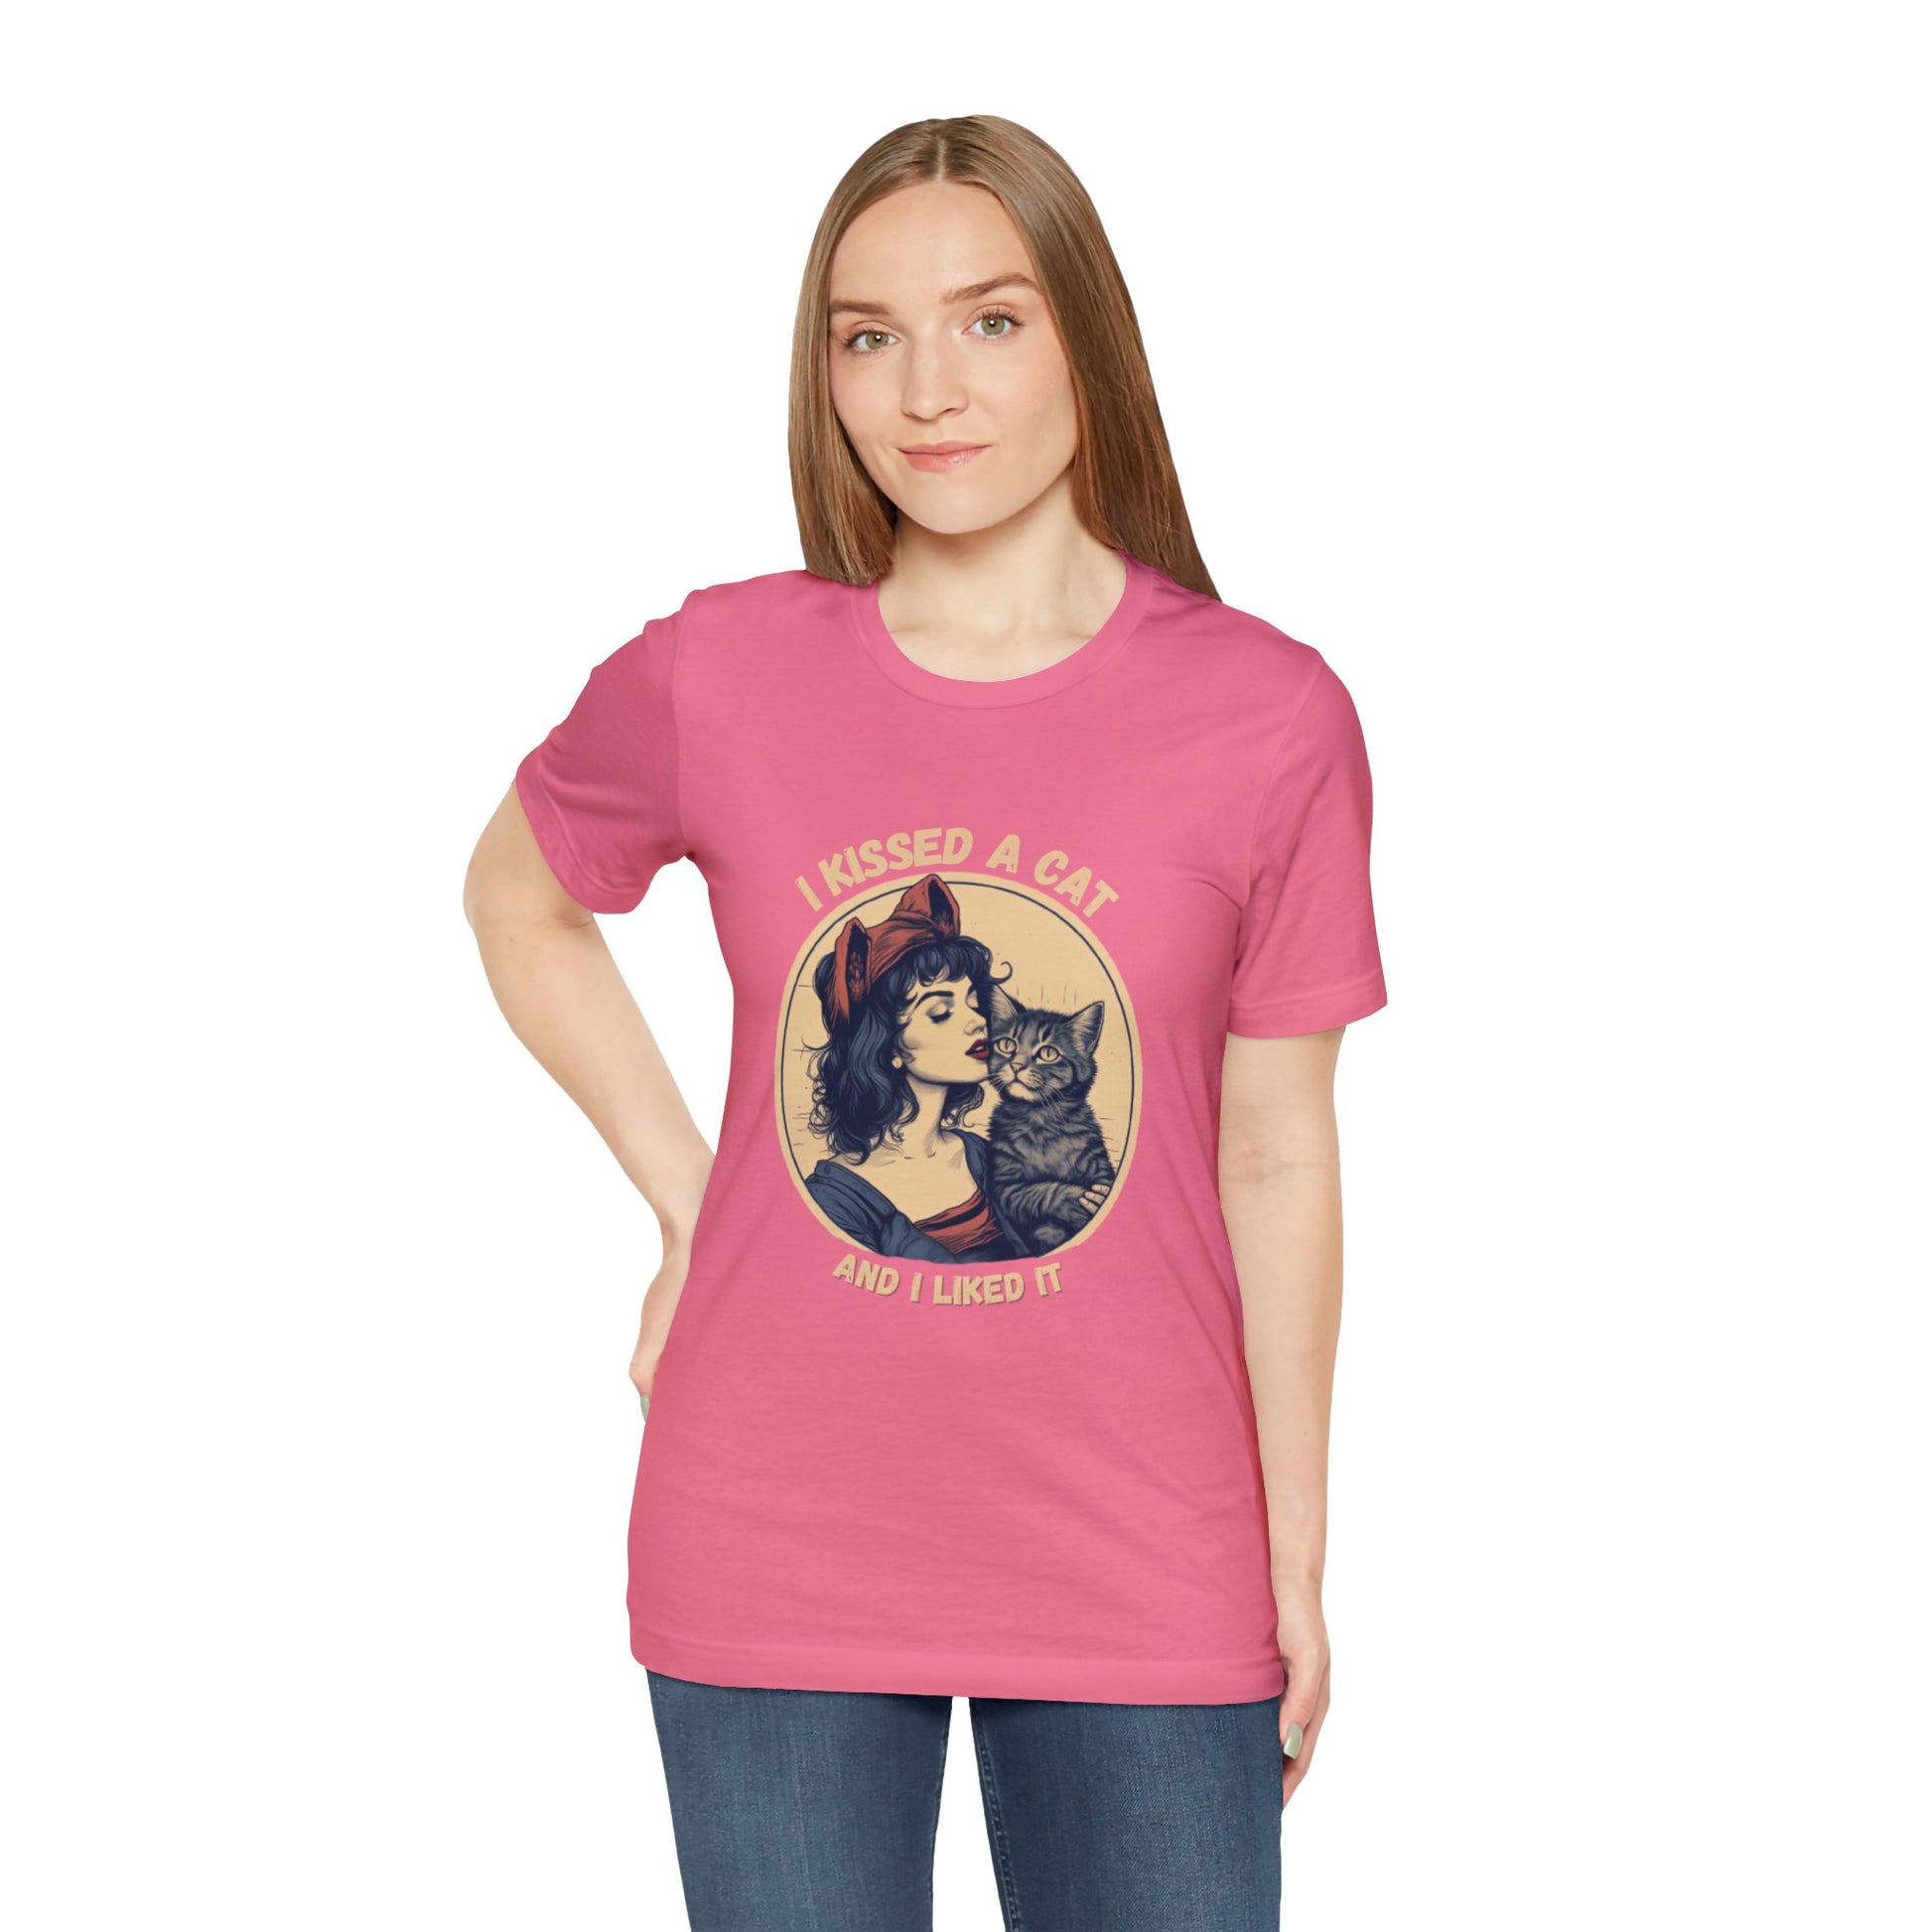 I kissed a cat and I liked it Tee Shirt |  Funny Unisex Short Sleeve Tee | Funny Cat Shirt - CrazyTomTShirts